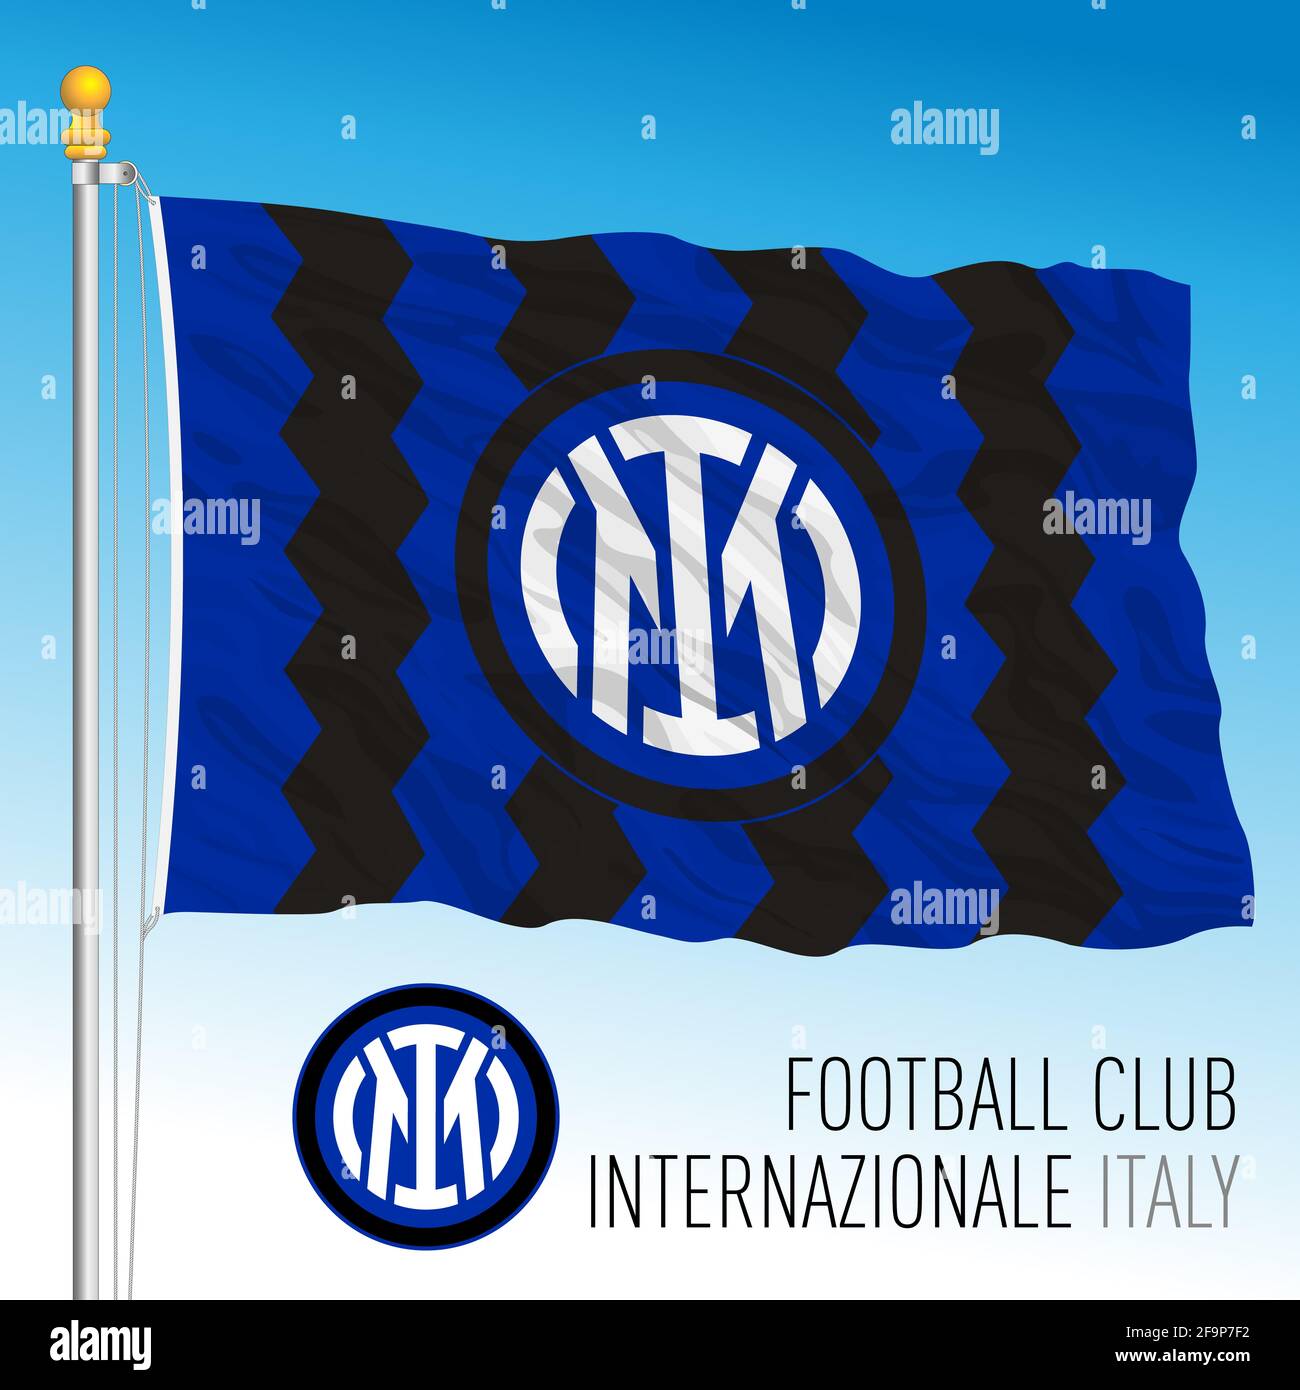 Europe, year 2021, International Football Club flag and coat of arms team in the new Super League championship, illustration Stock Photo